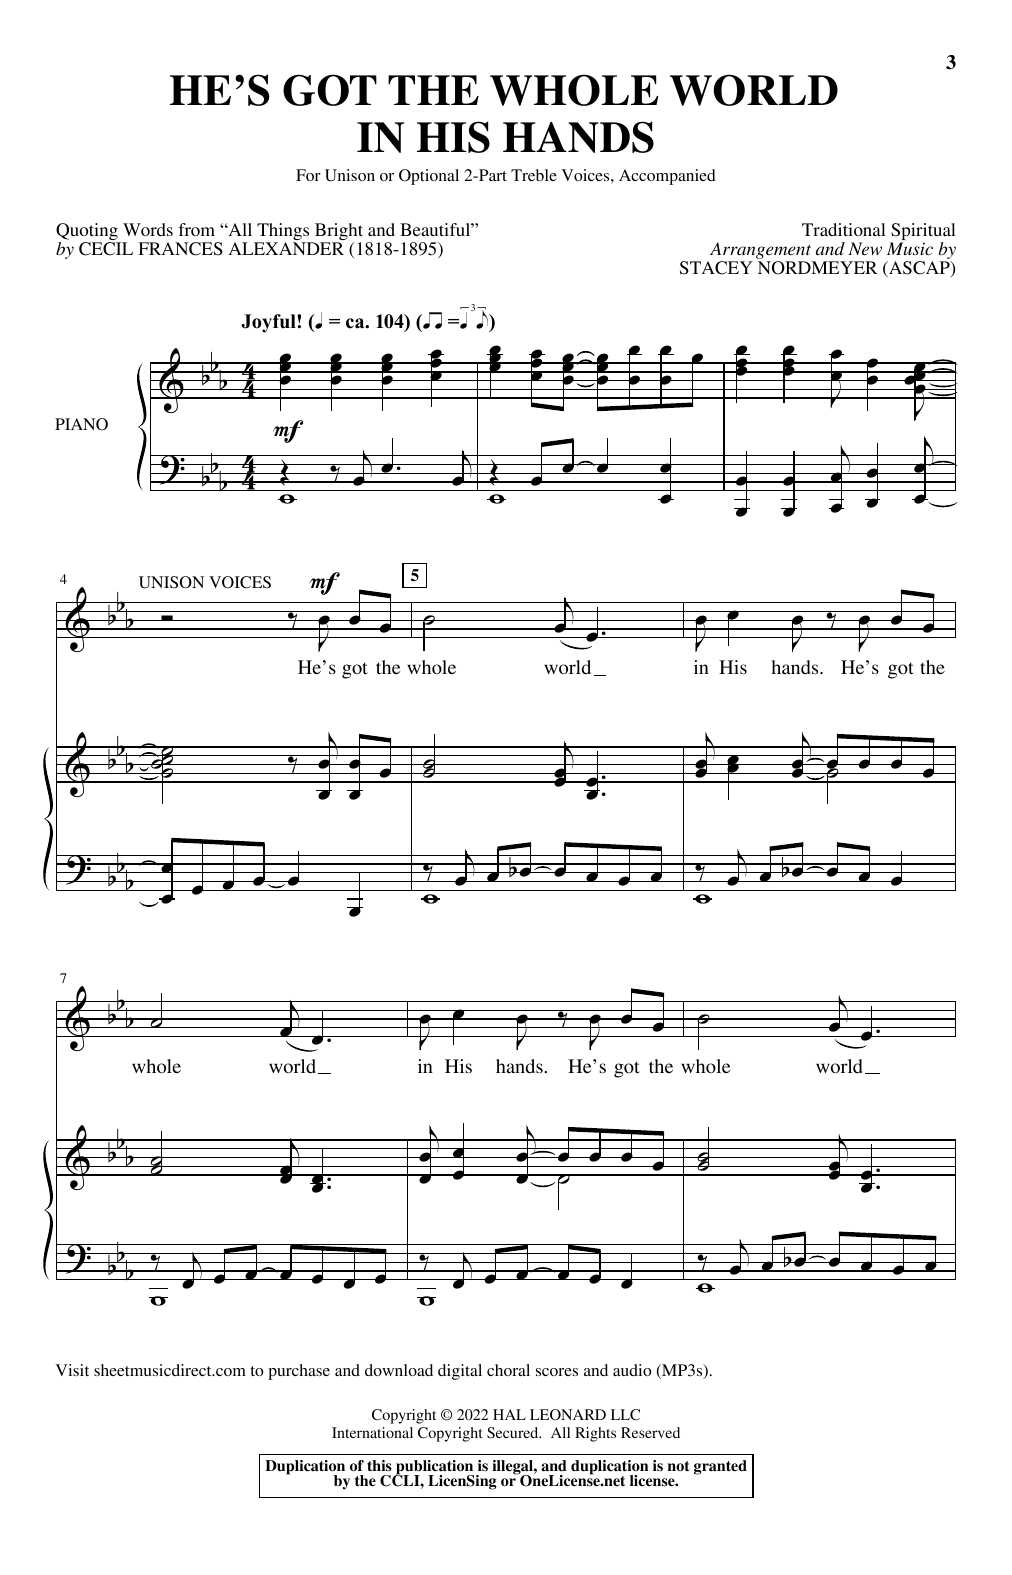 Download Traditional Spiritual He's Got The Whole World In His Hands ( Sheet Music